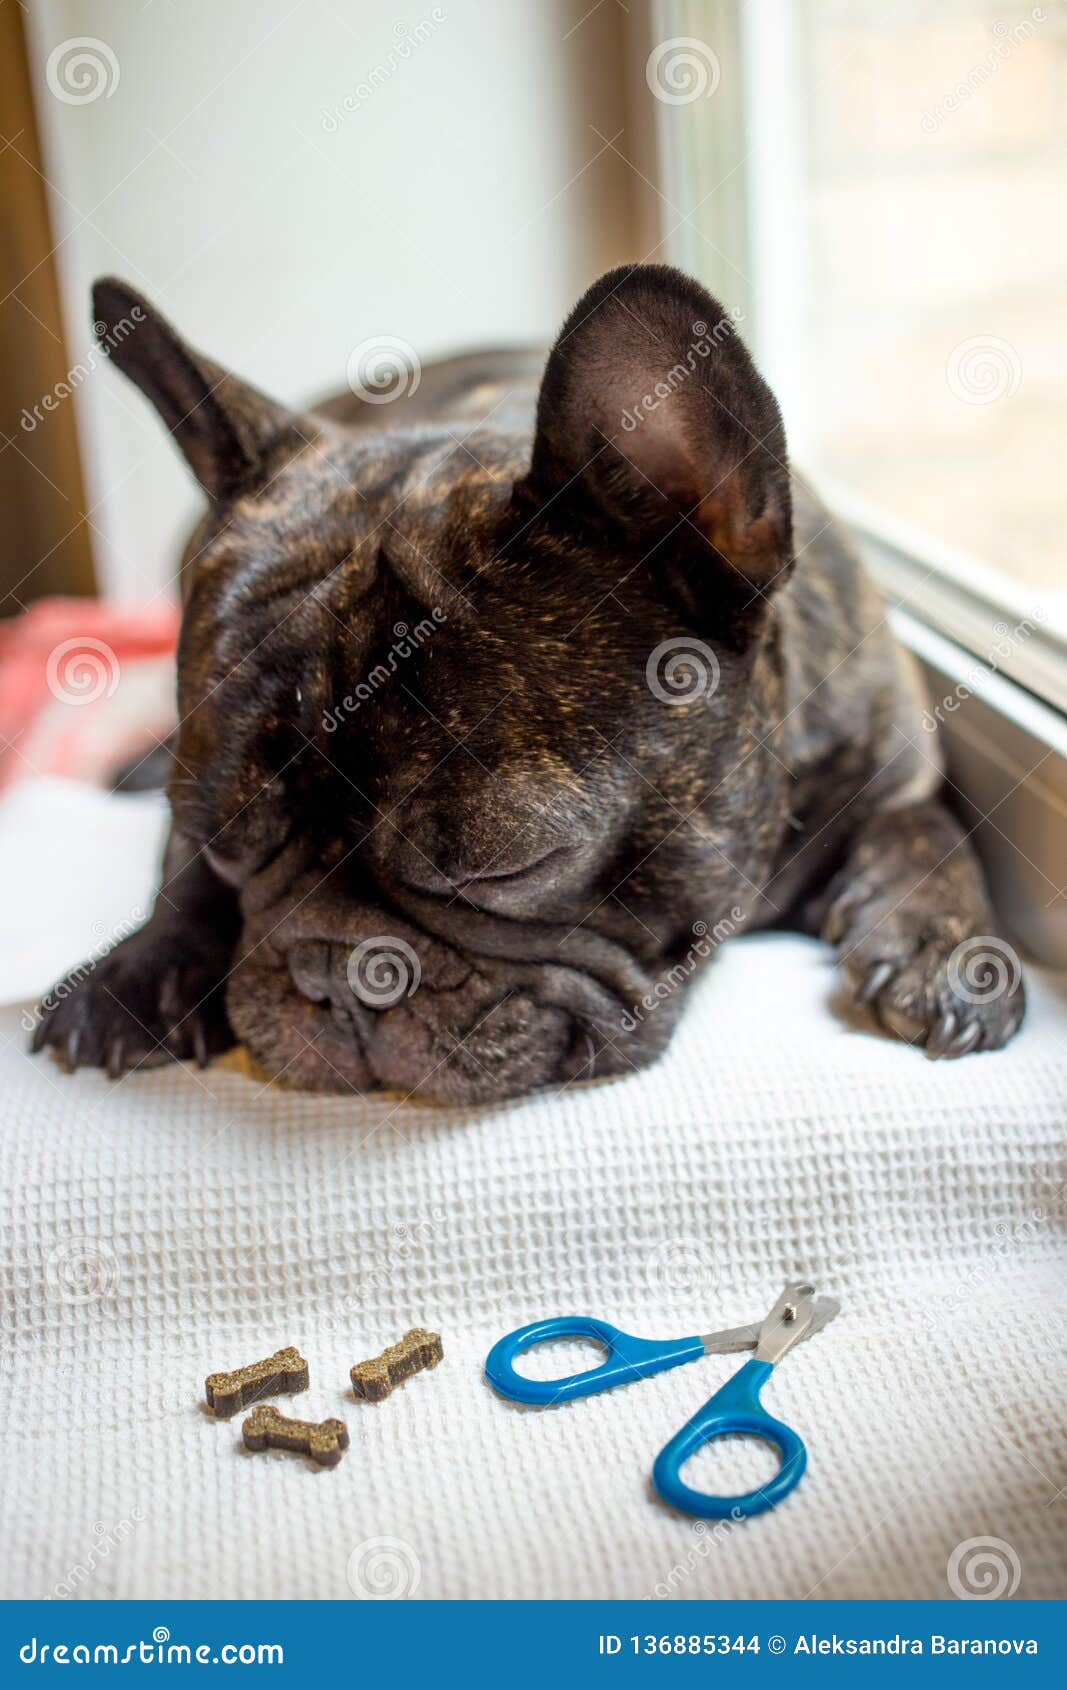 French Bulldog Is On The Table, Ready For The Nail